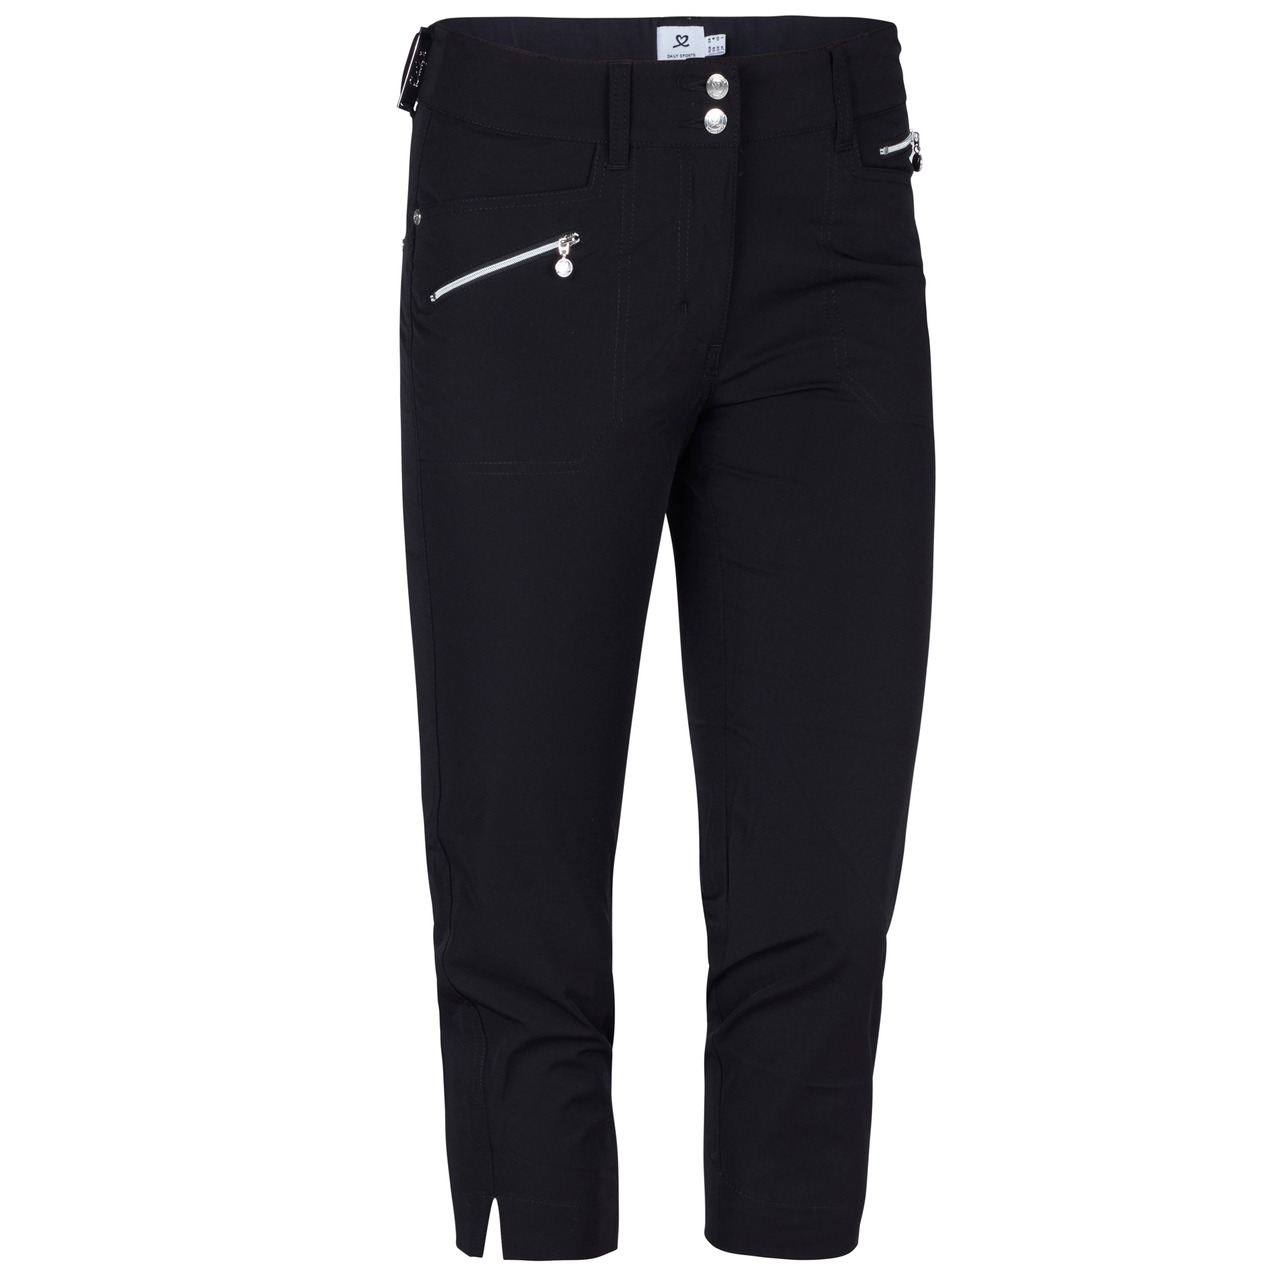 Daily Sports Miracle High Water Women's Golf Pants - Black - Fore Ladies -  Golf Dresses and Clothes, Tennis Skirts and Outfits, and Fashionable  Activewear